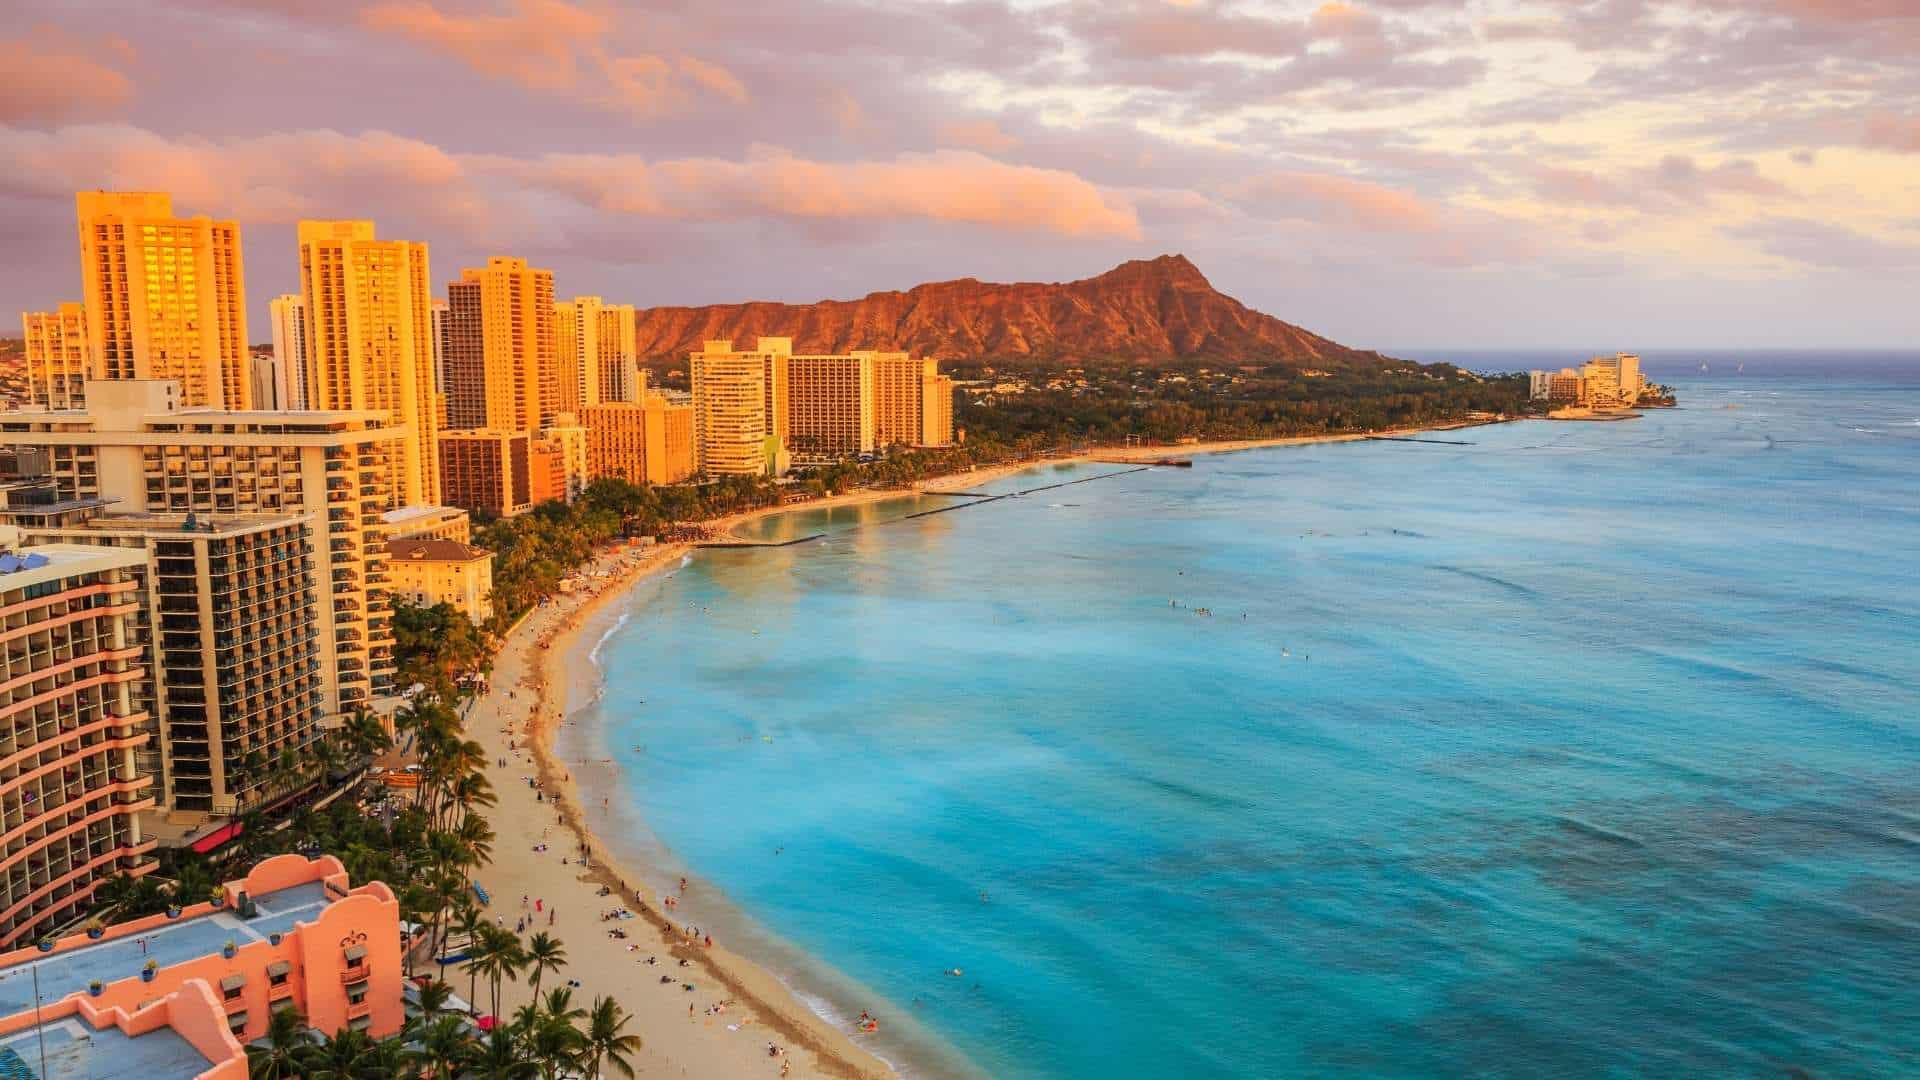 7 Best Hotels in Oahu for Families Where to Stay with Kids